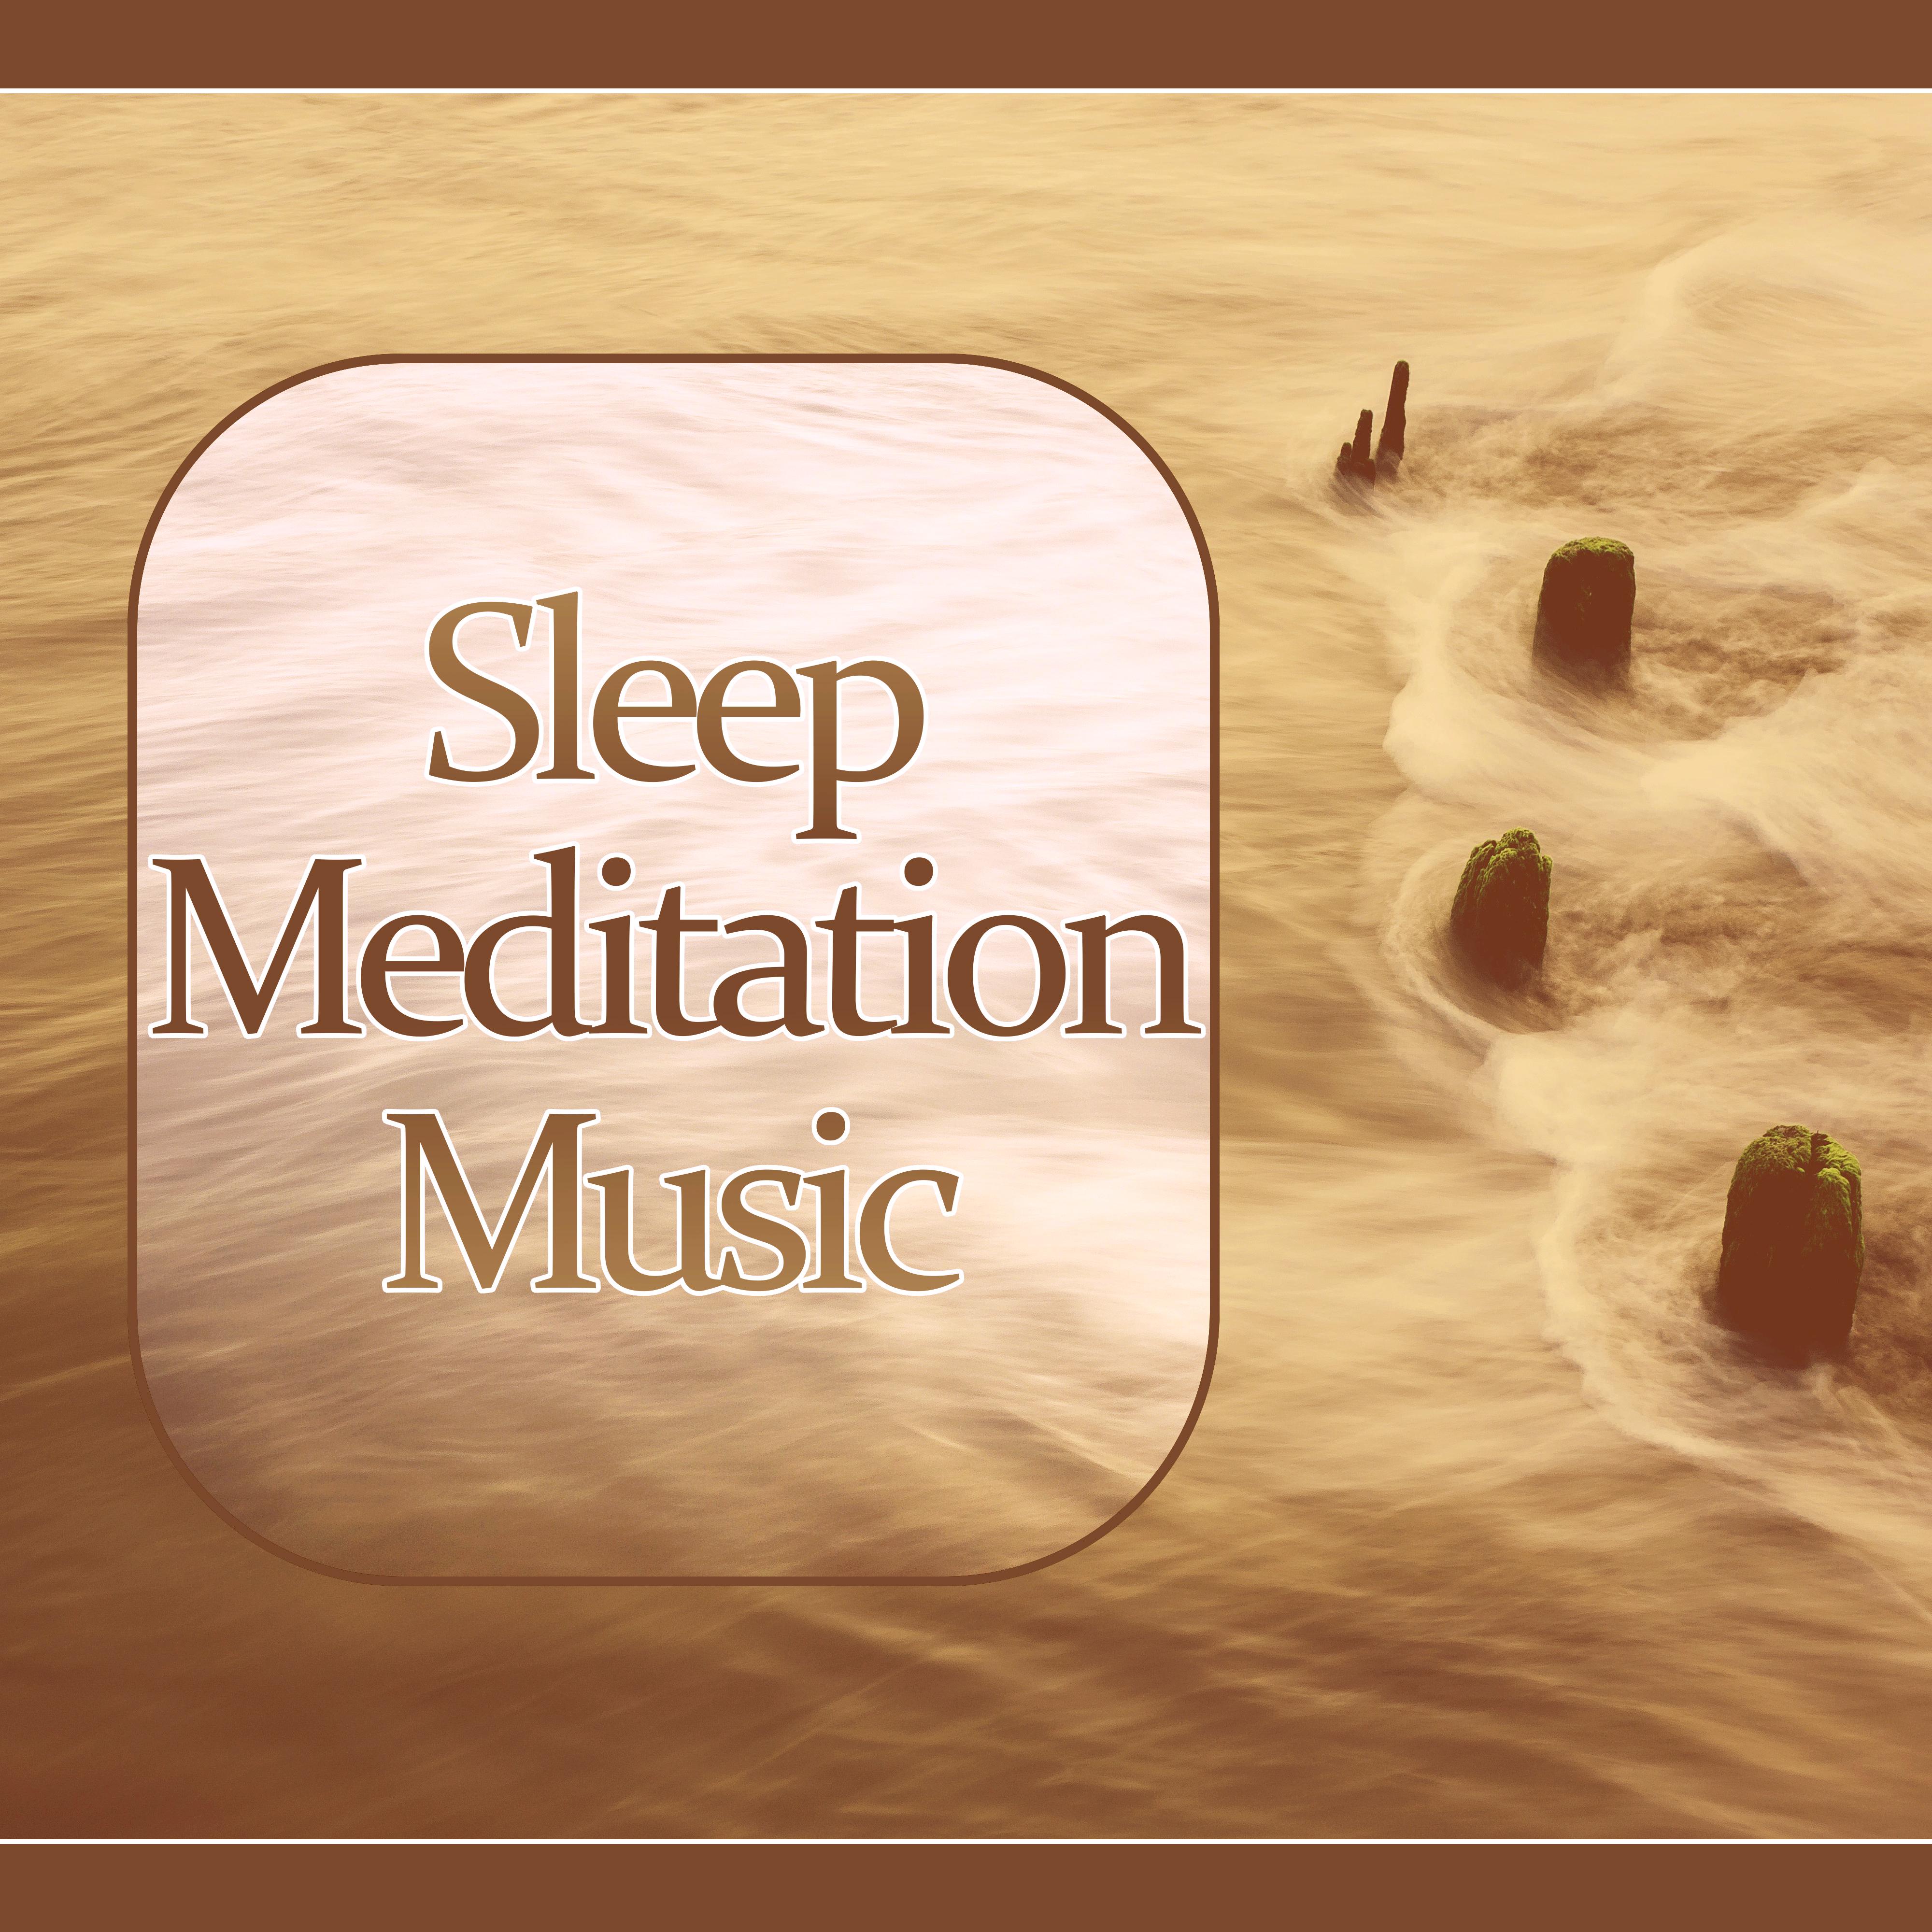 Sleep Meditation Music - Bedtime Songs to Help You Relax, Meditate,Rest, Anti Stress, Calm Night, New Age for Insomnia